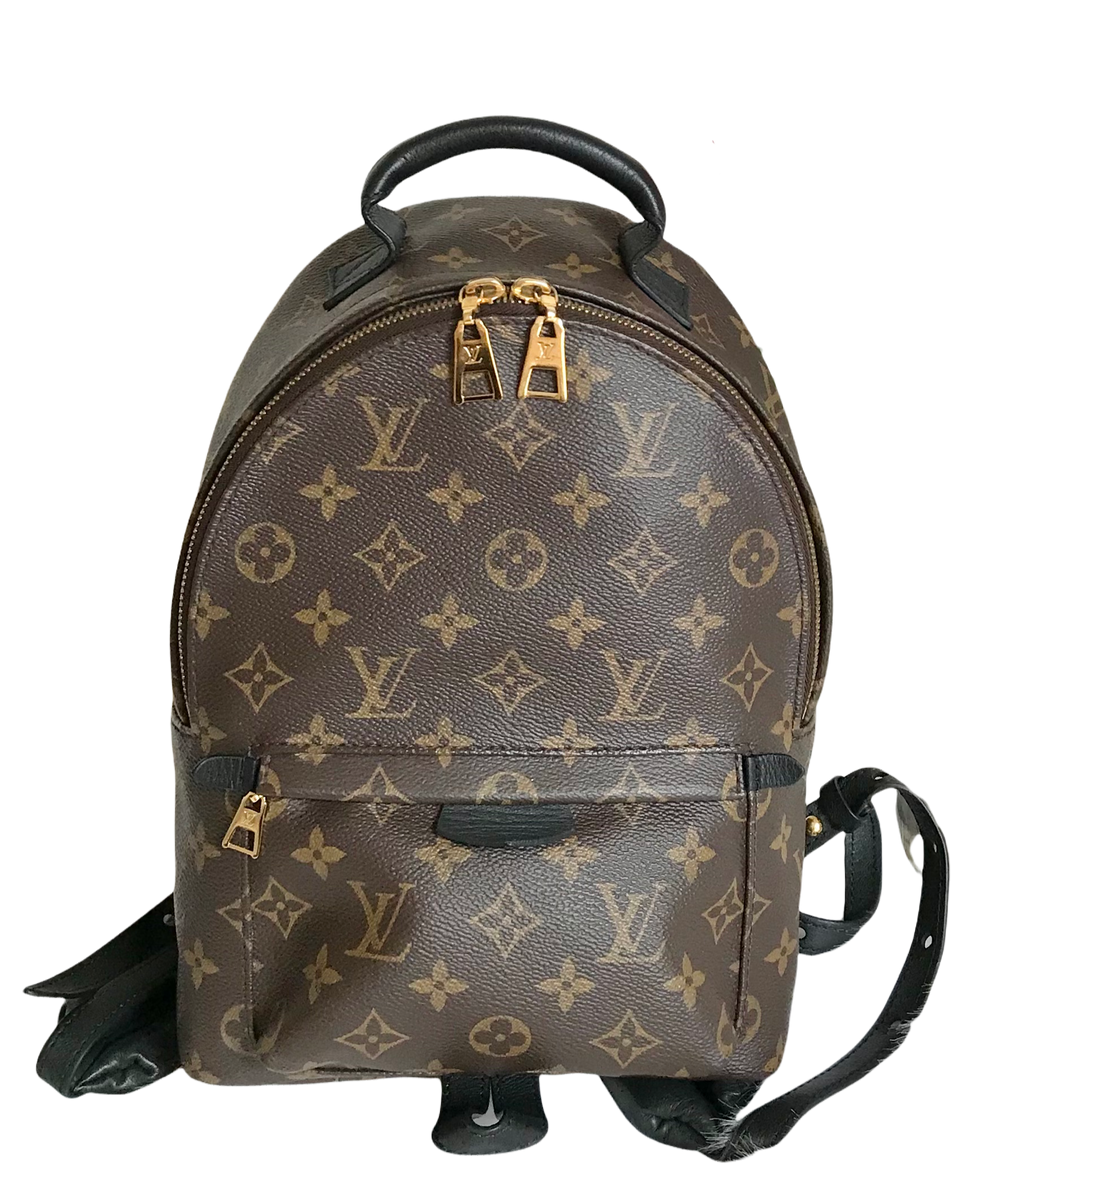 Louis Vuitton 2019 Pre-owned Monogram Palm Spring PM Backpack - Brown